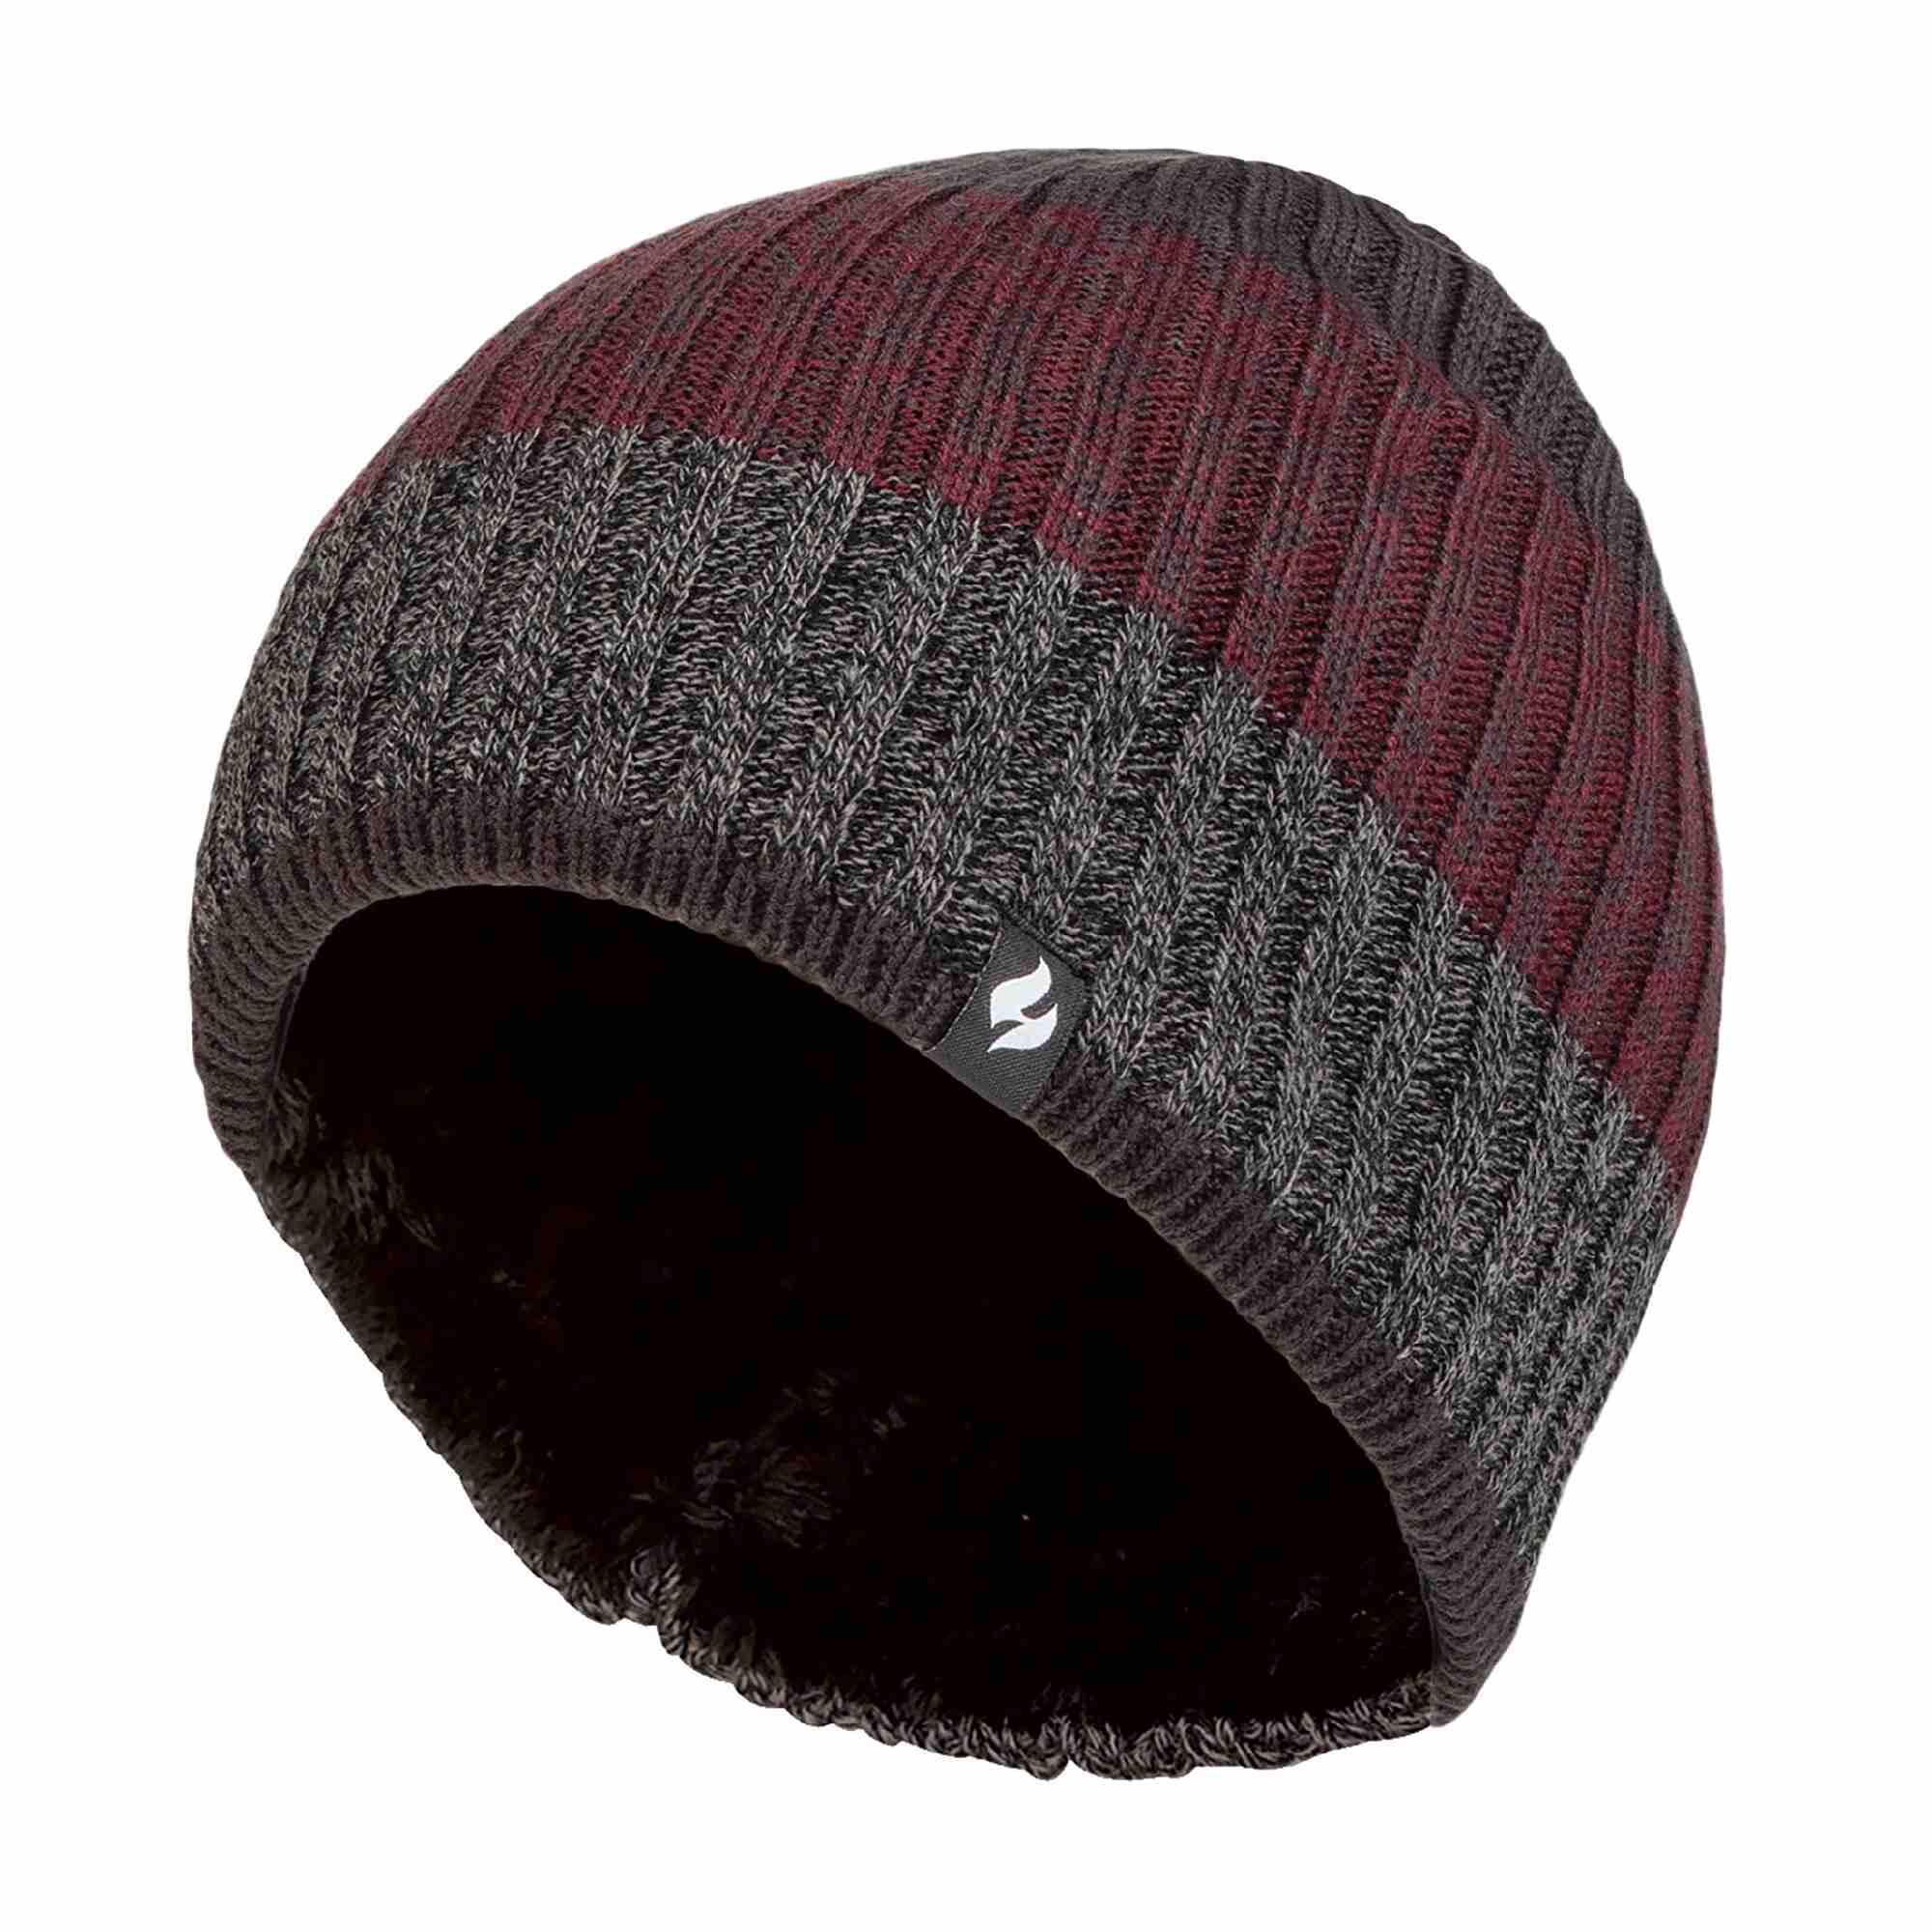 Mens Fleece Lined Striped Winter High Performance Soft Insulated Thermal Beanie 1/4